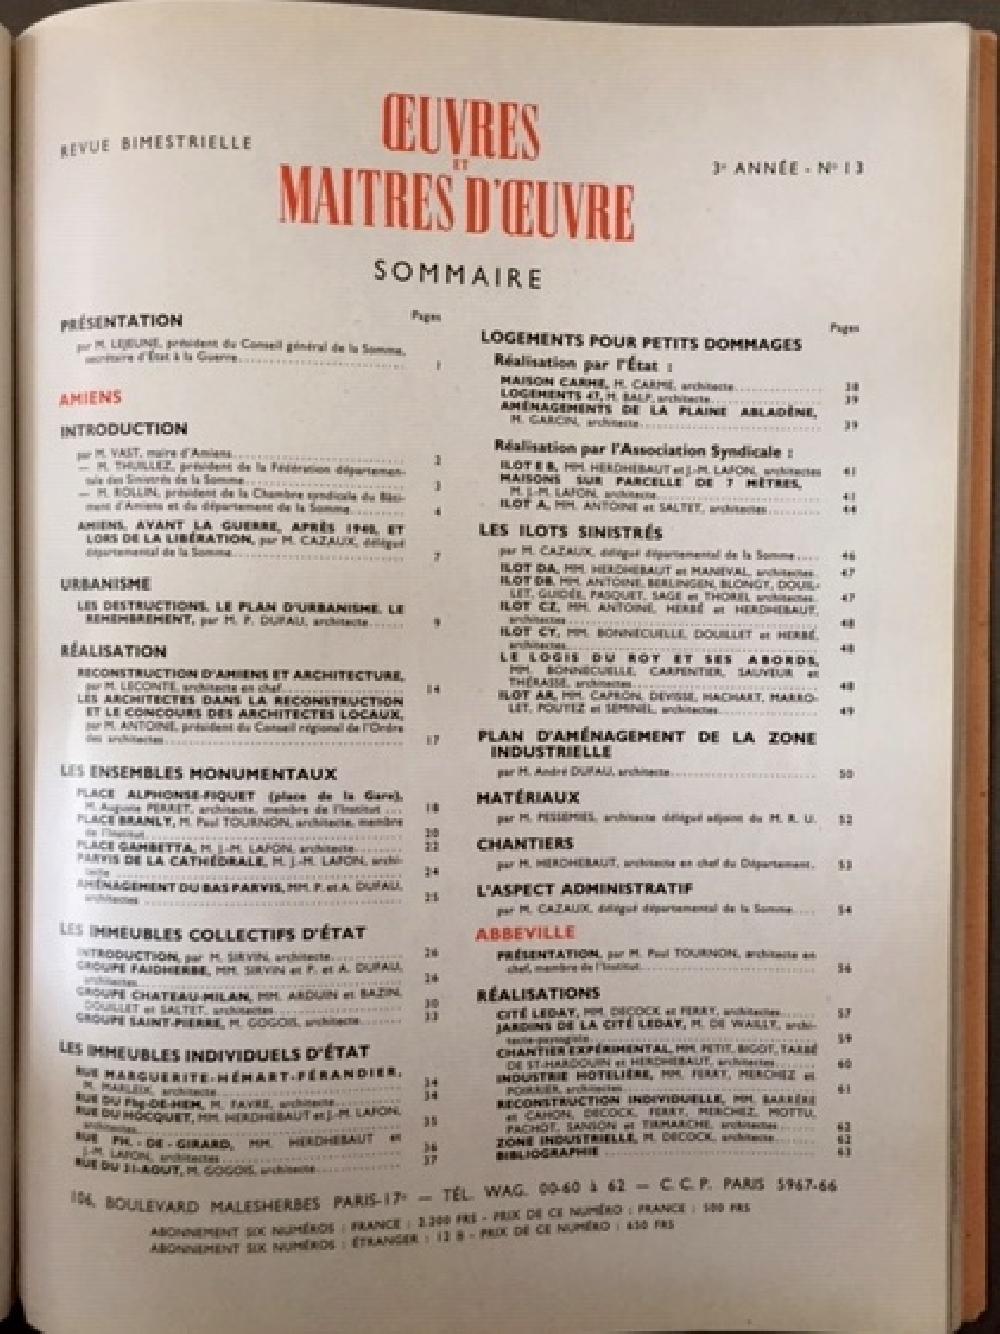 Oeuvres et Maitres d'oeuvre - Amiens Abbeville